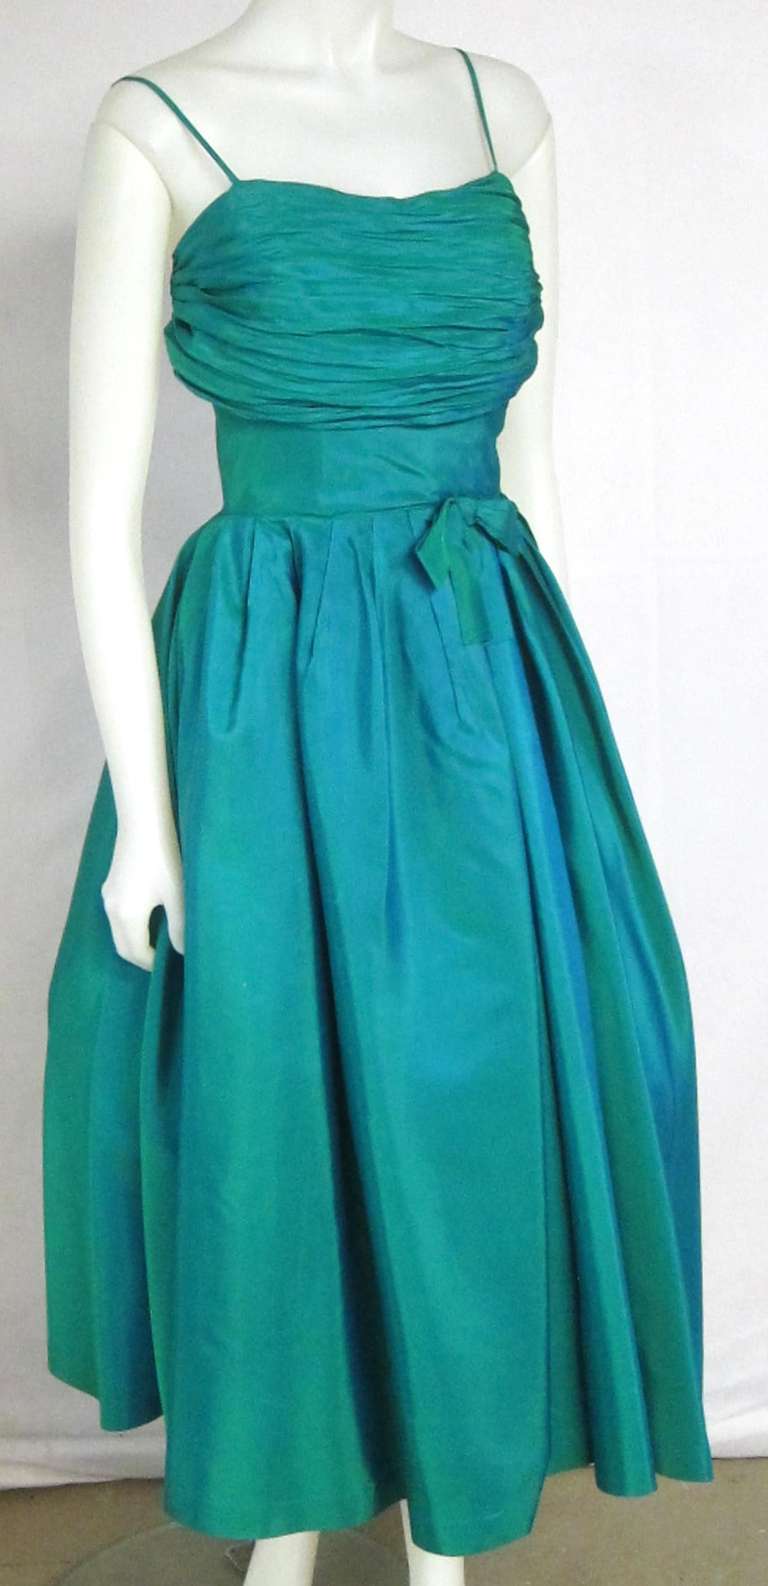 Gorgeous dress from the 1950s. Shimmering Jewel Tone Taffeta material with ruched bodice and boning, spaghetti straps, bow at waist and side metal zipper.

Bust:  32